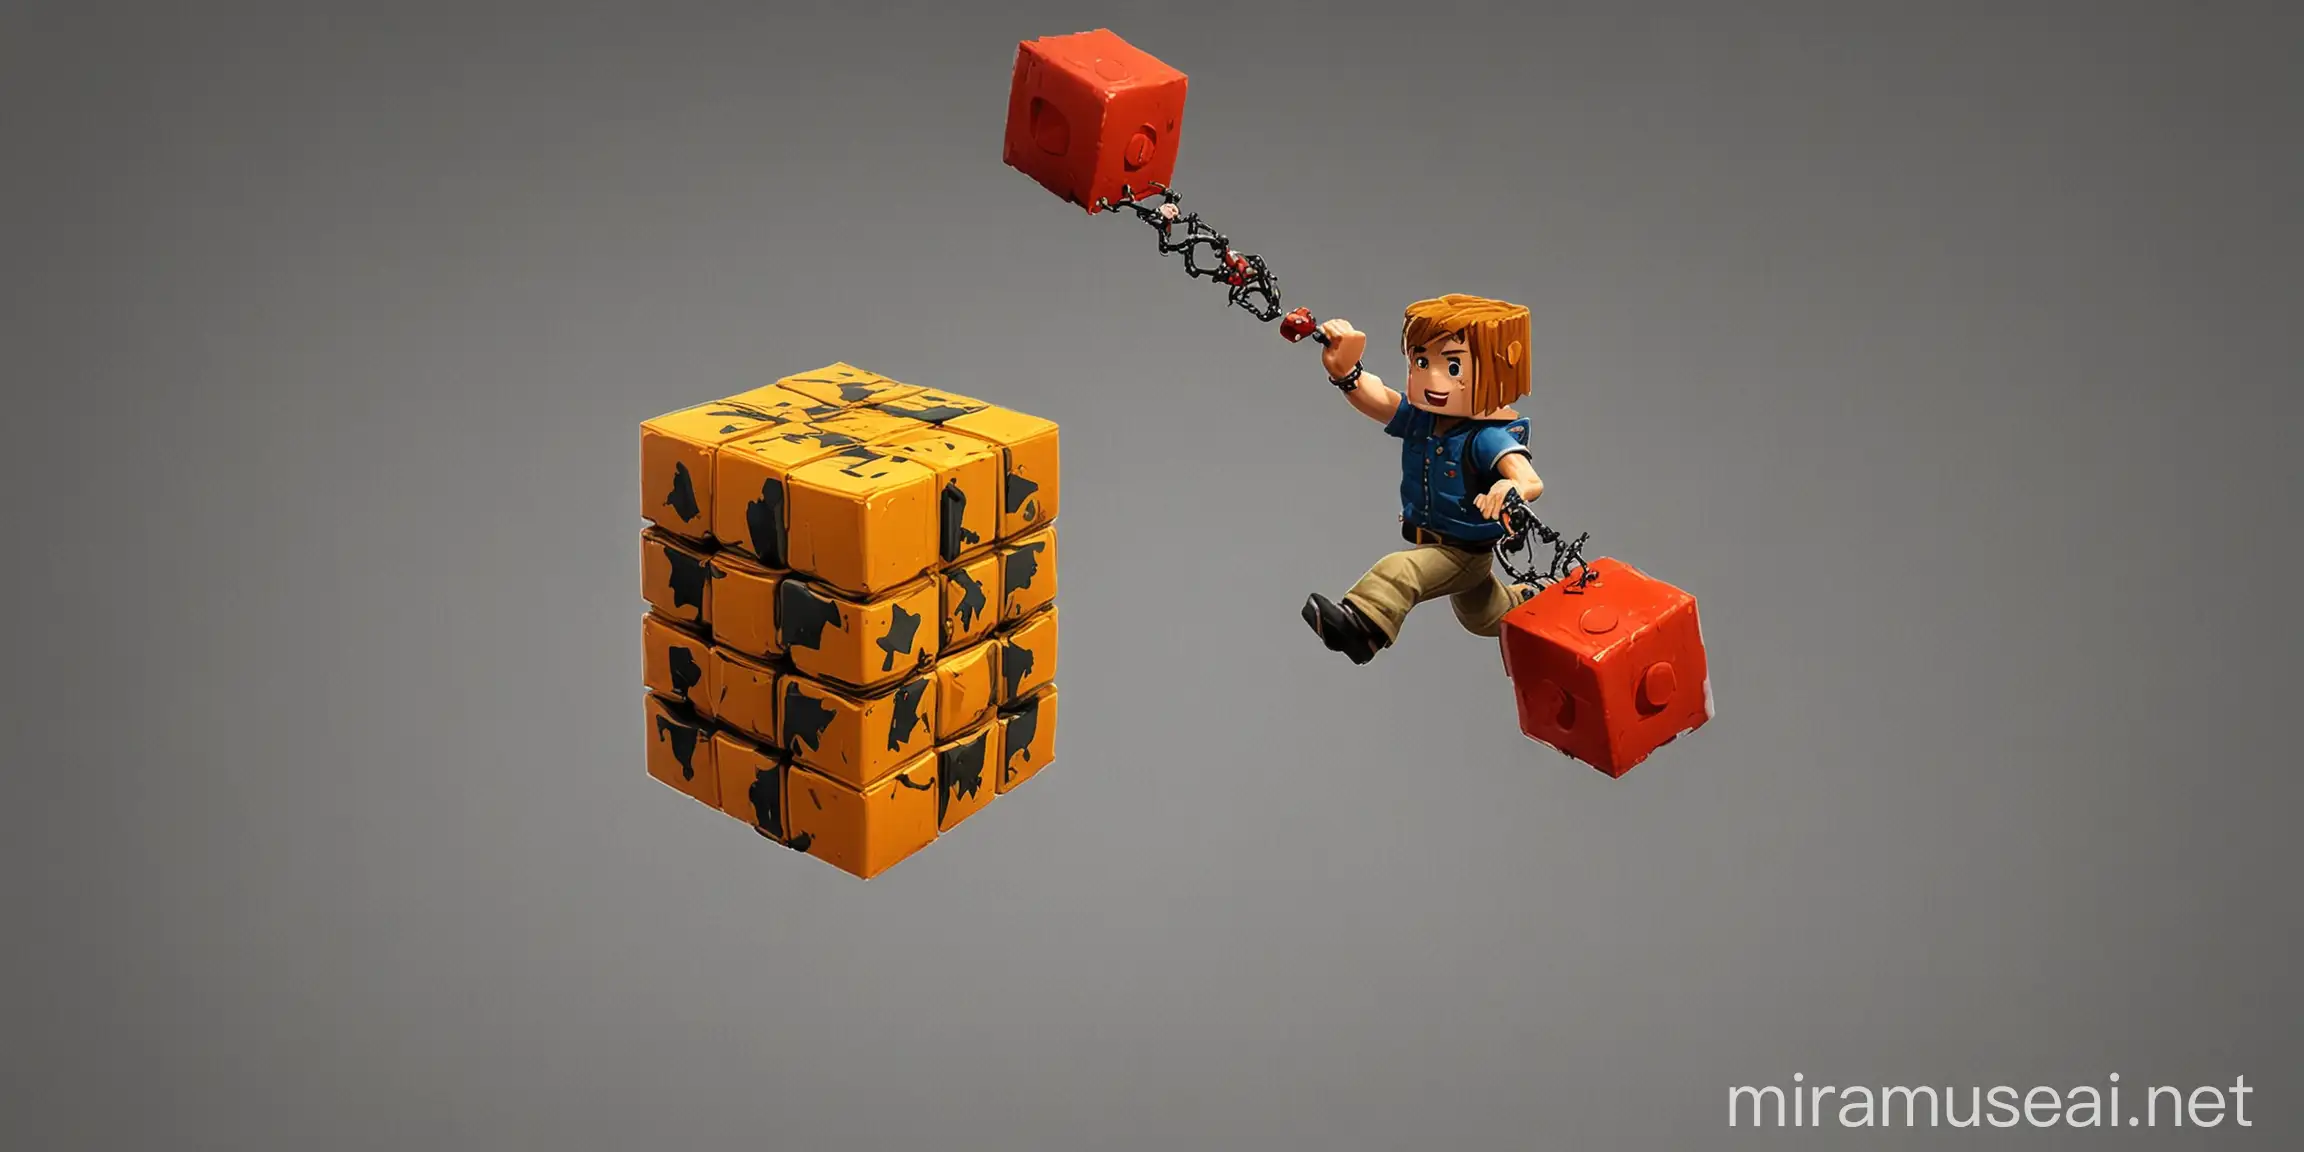 Roblox Characters Jumping to Reach Cube and Ball